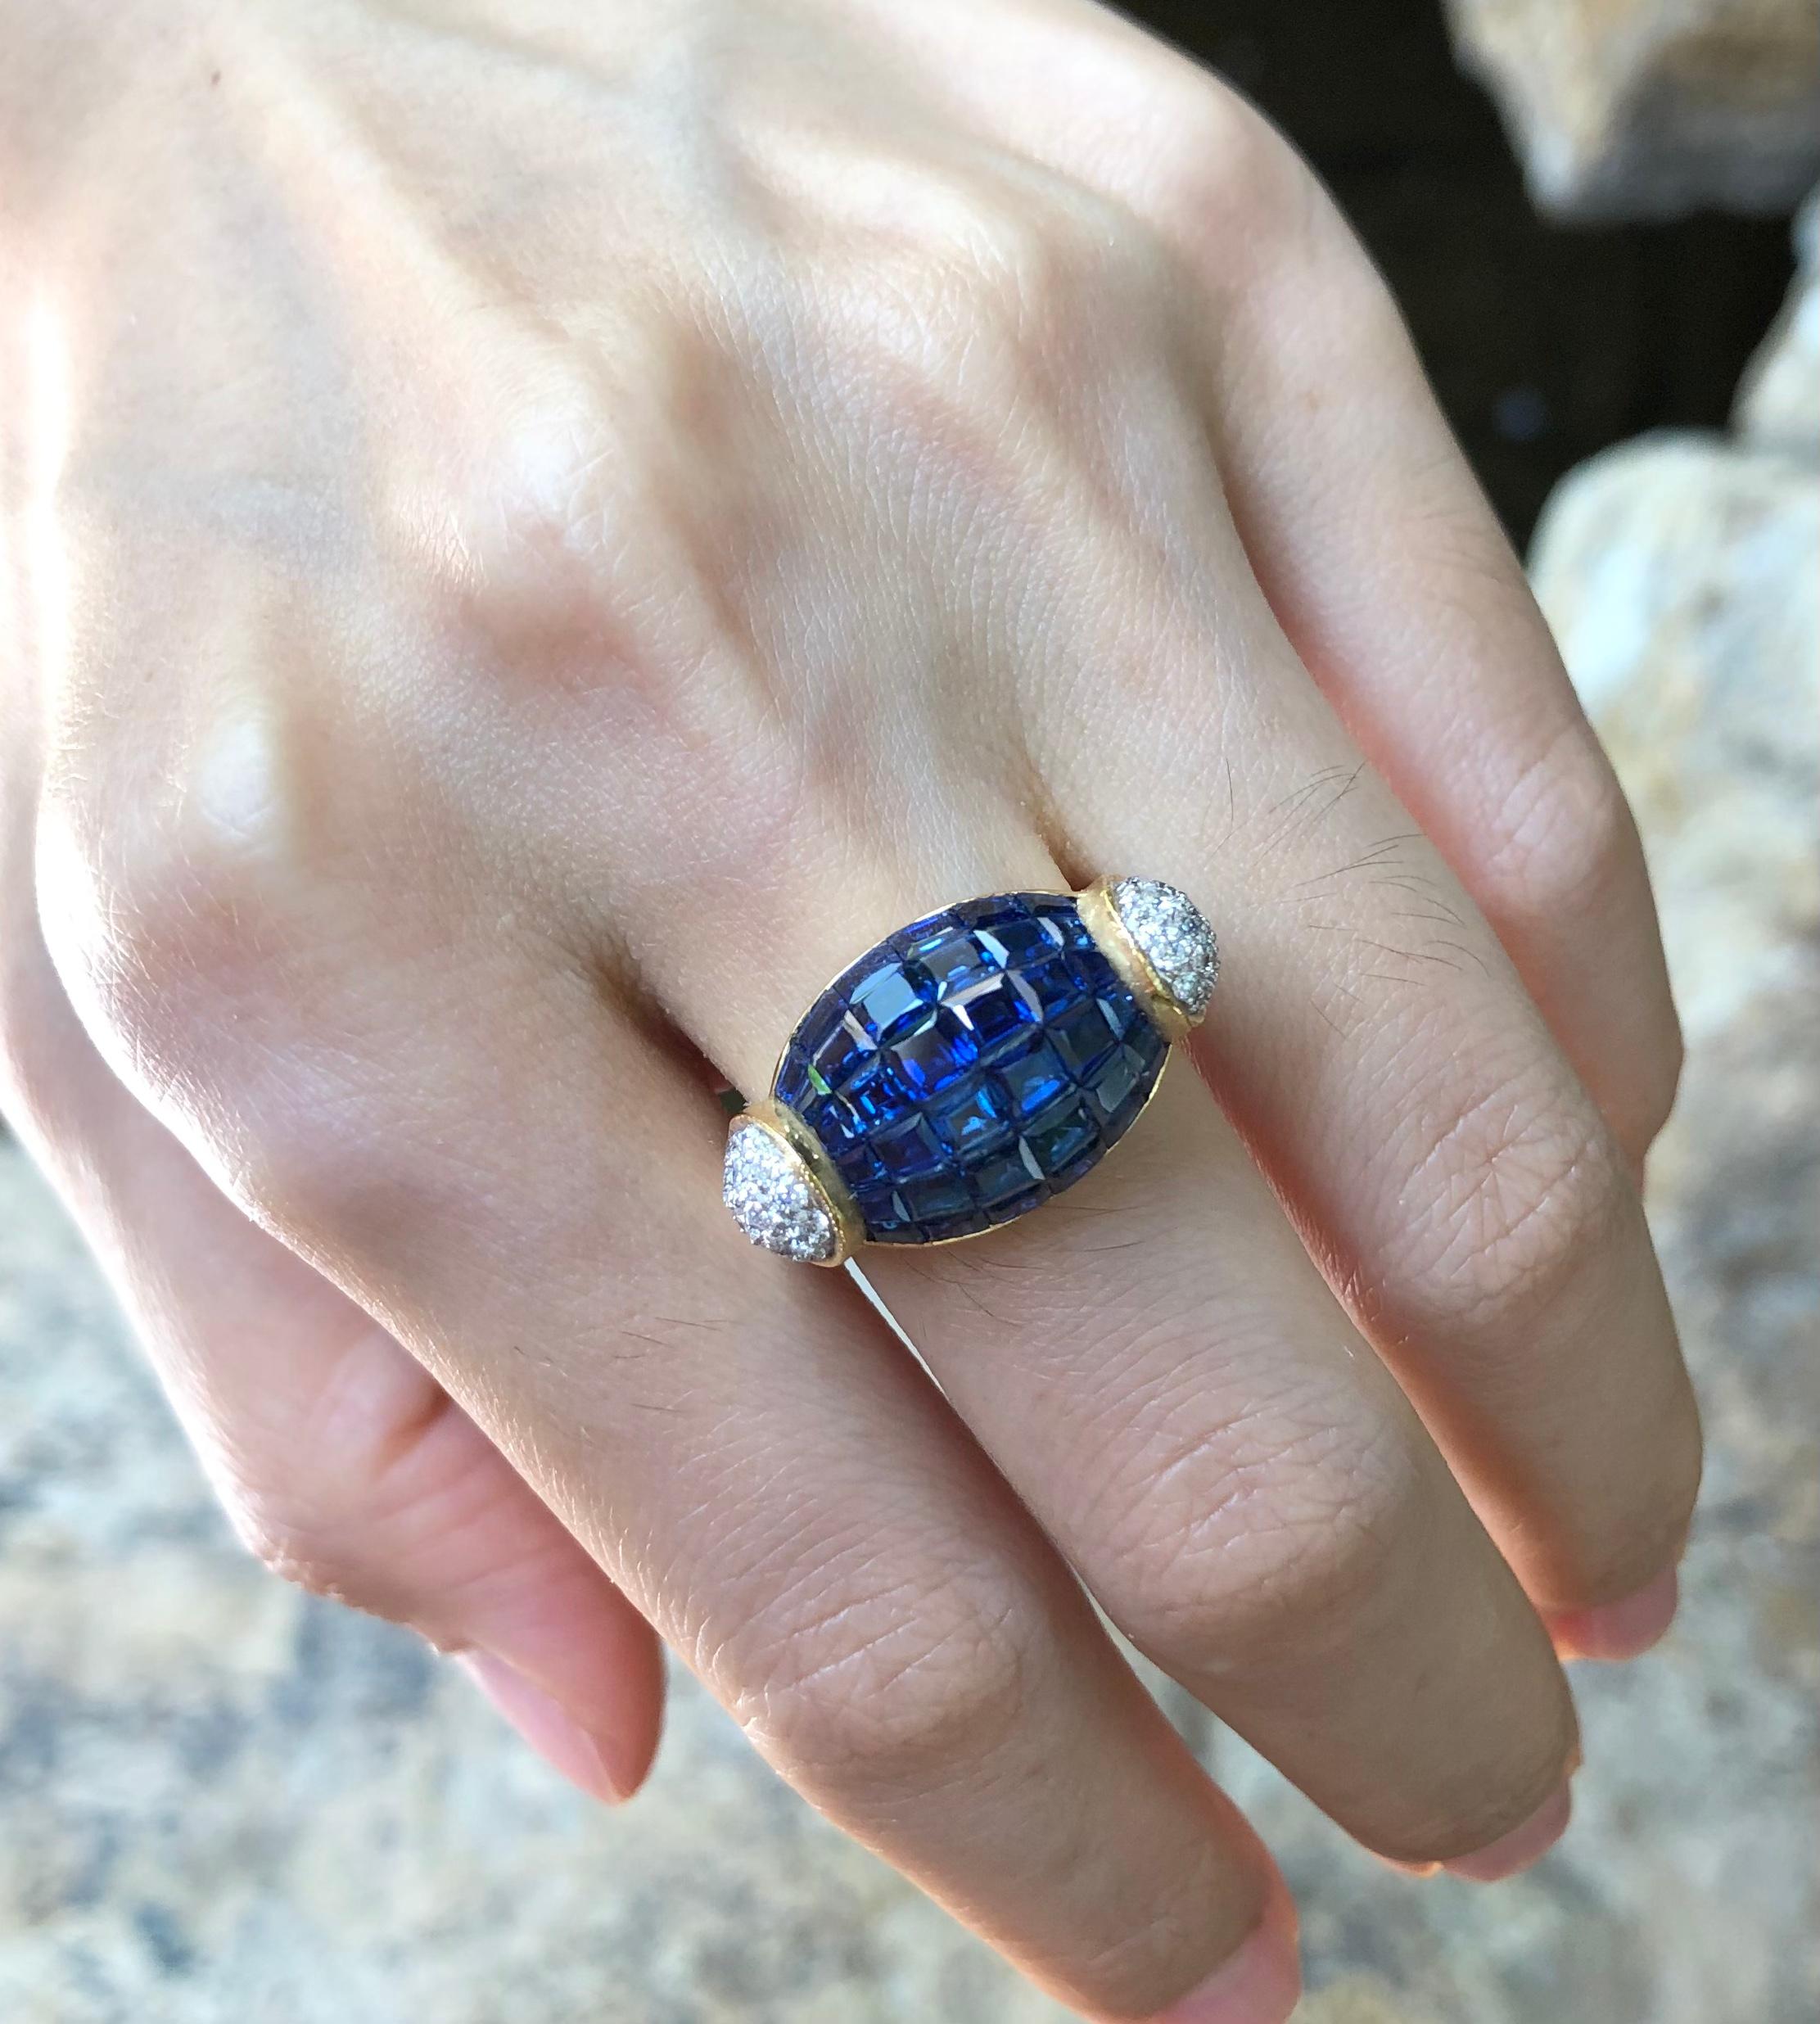 Blue Sapphire 6.83 carats with Diamond 0.48 carat Ring set in 18 Karat Gold Settings

Width:  2.3 cm 
Length:  1.3 cm
Ring Size: 54
Total Weight: 12.37 grams

